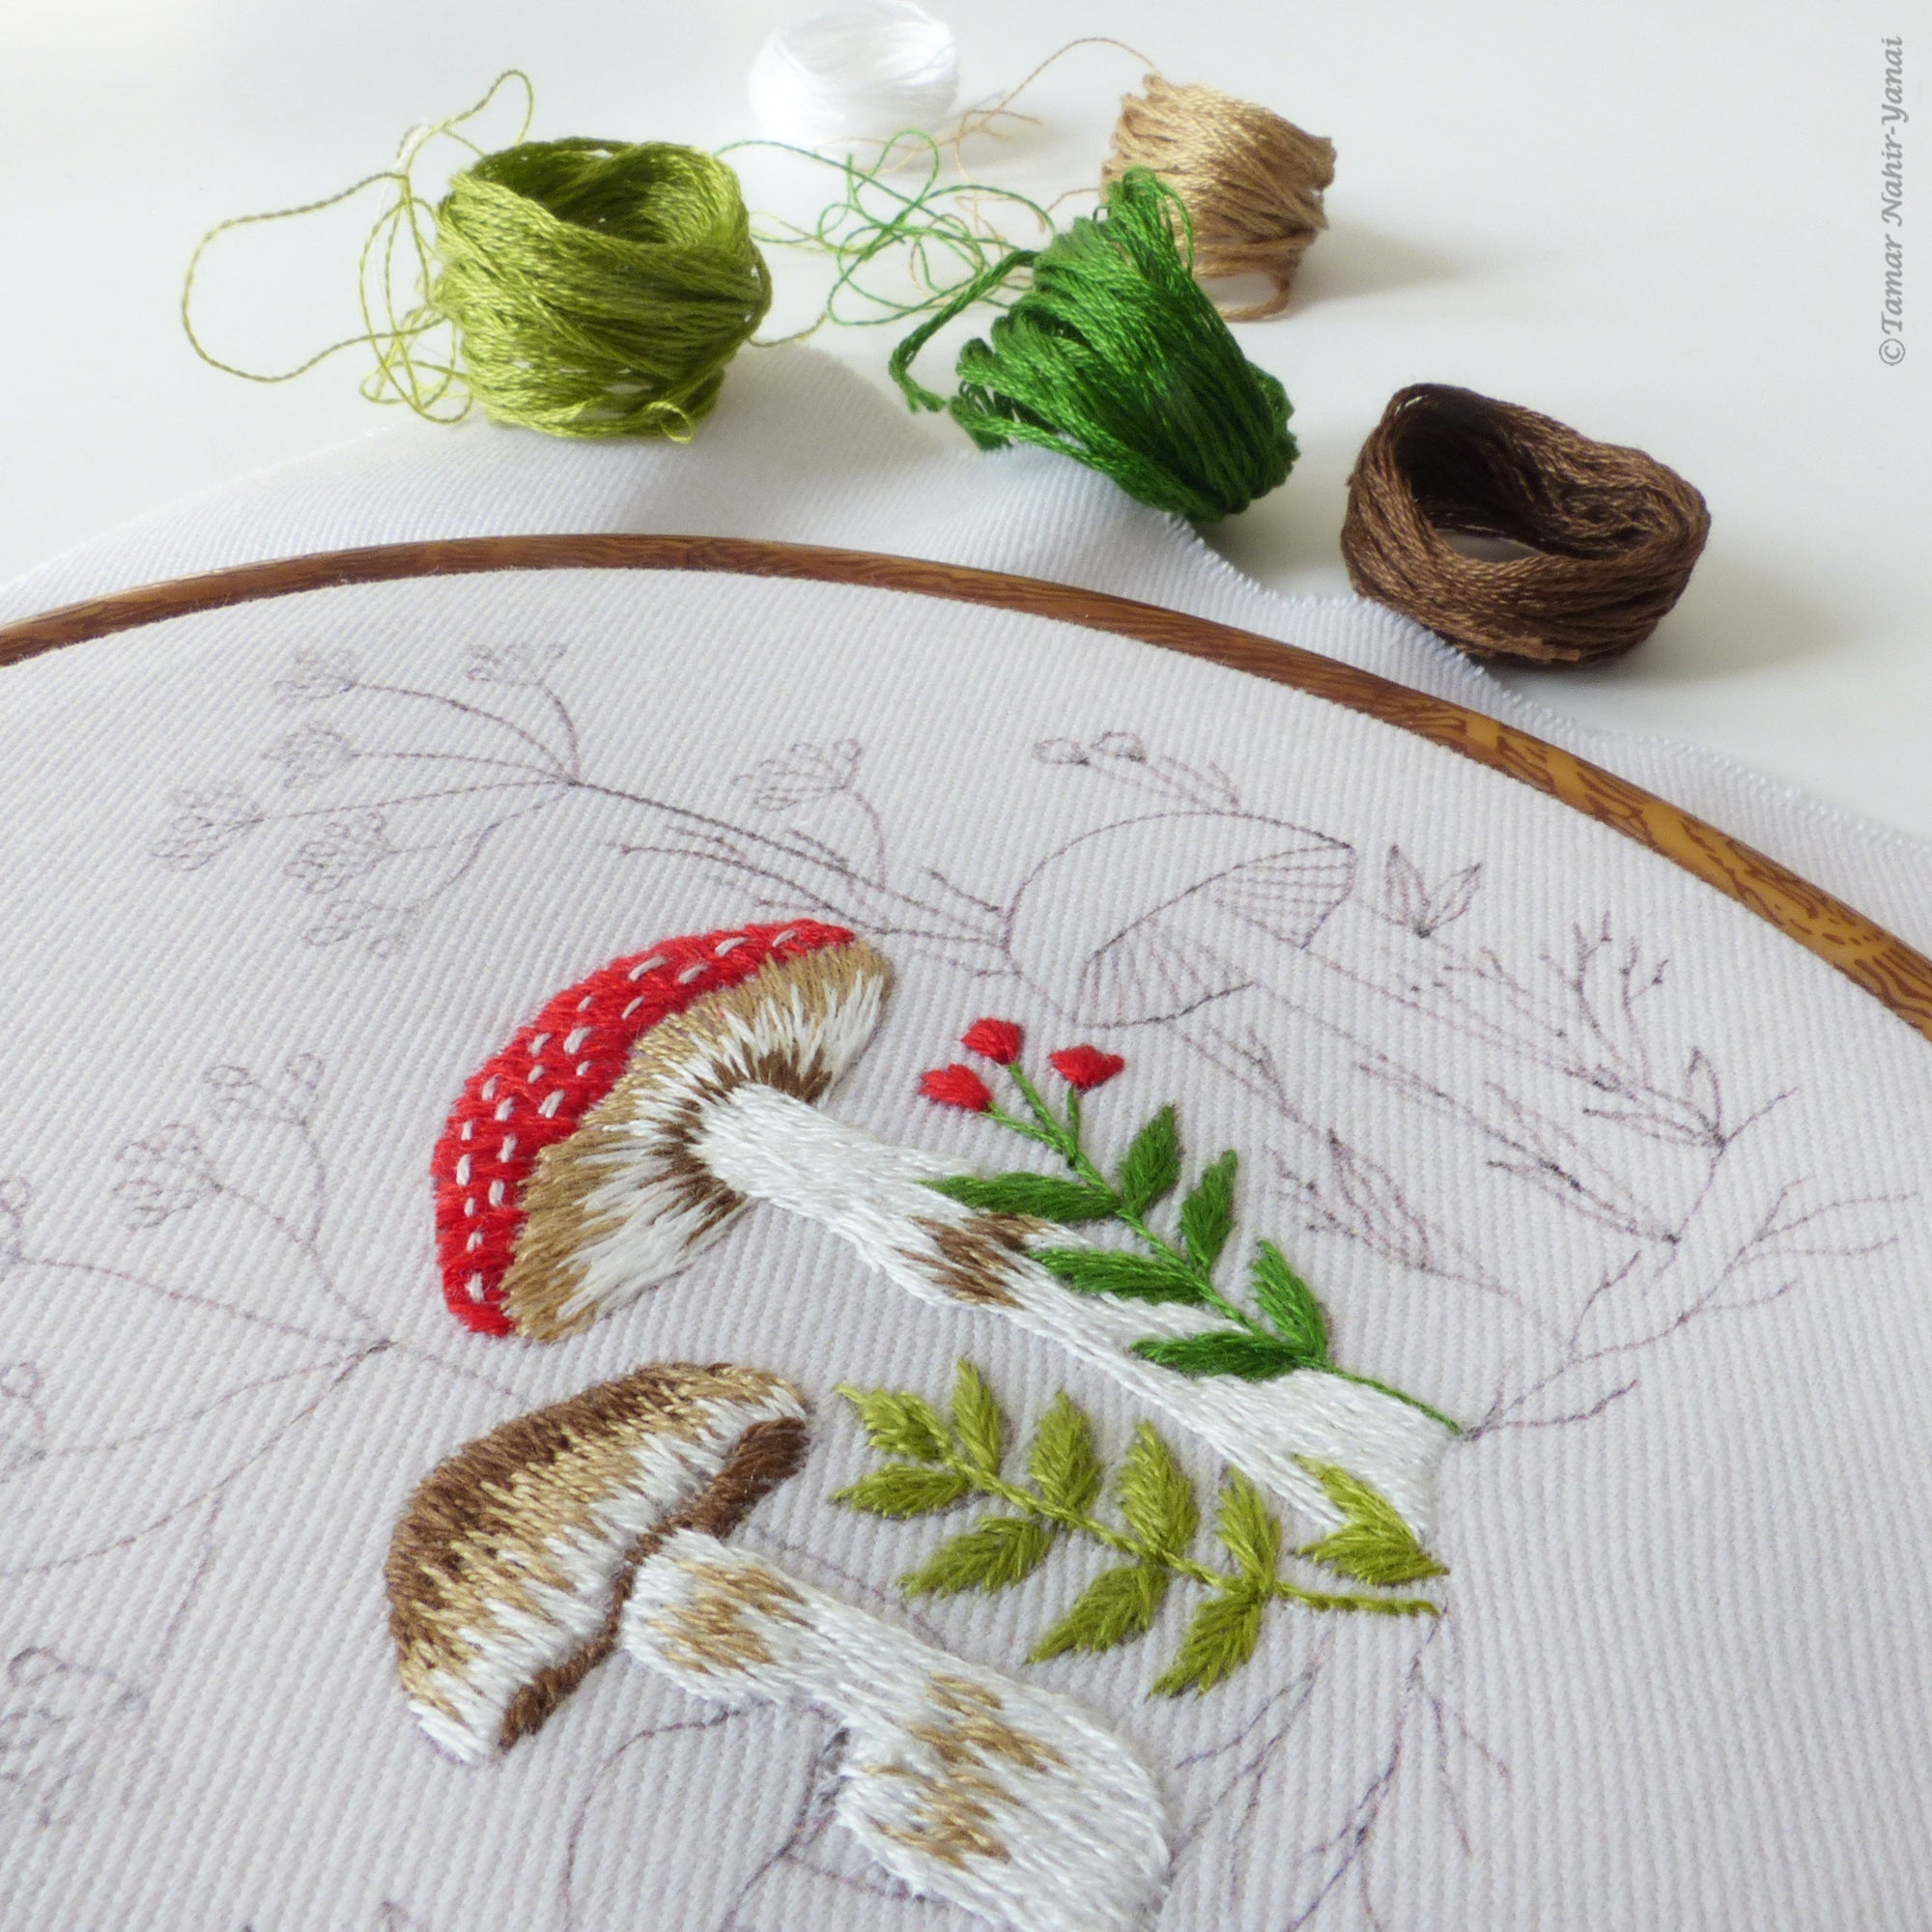 Mushroom Woodland Blackwork Embroidery Kit by Stitched Stories, 8 in, Cotton